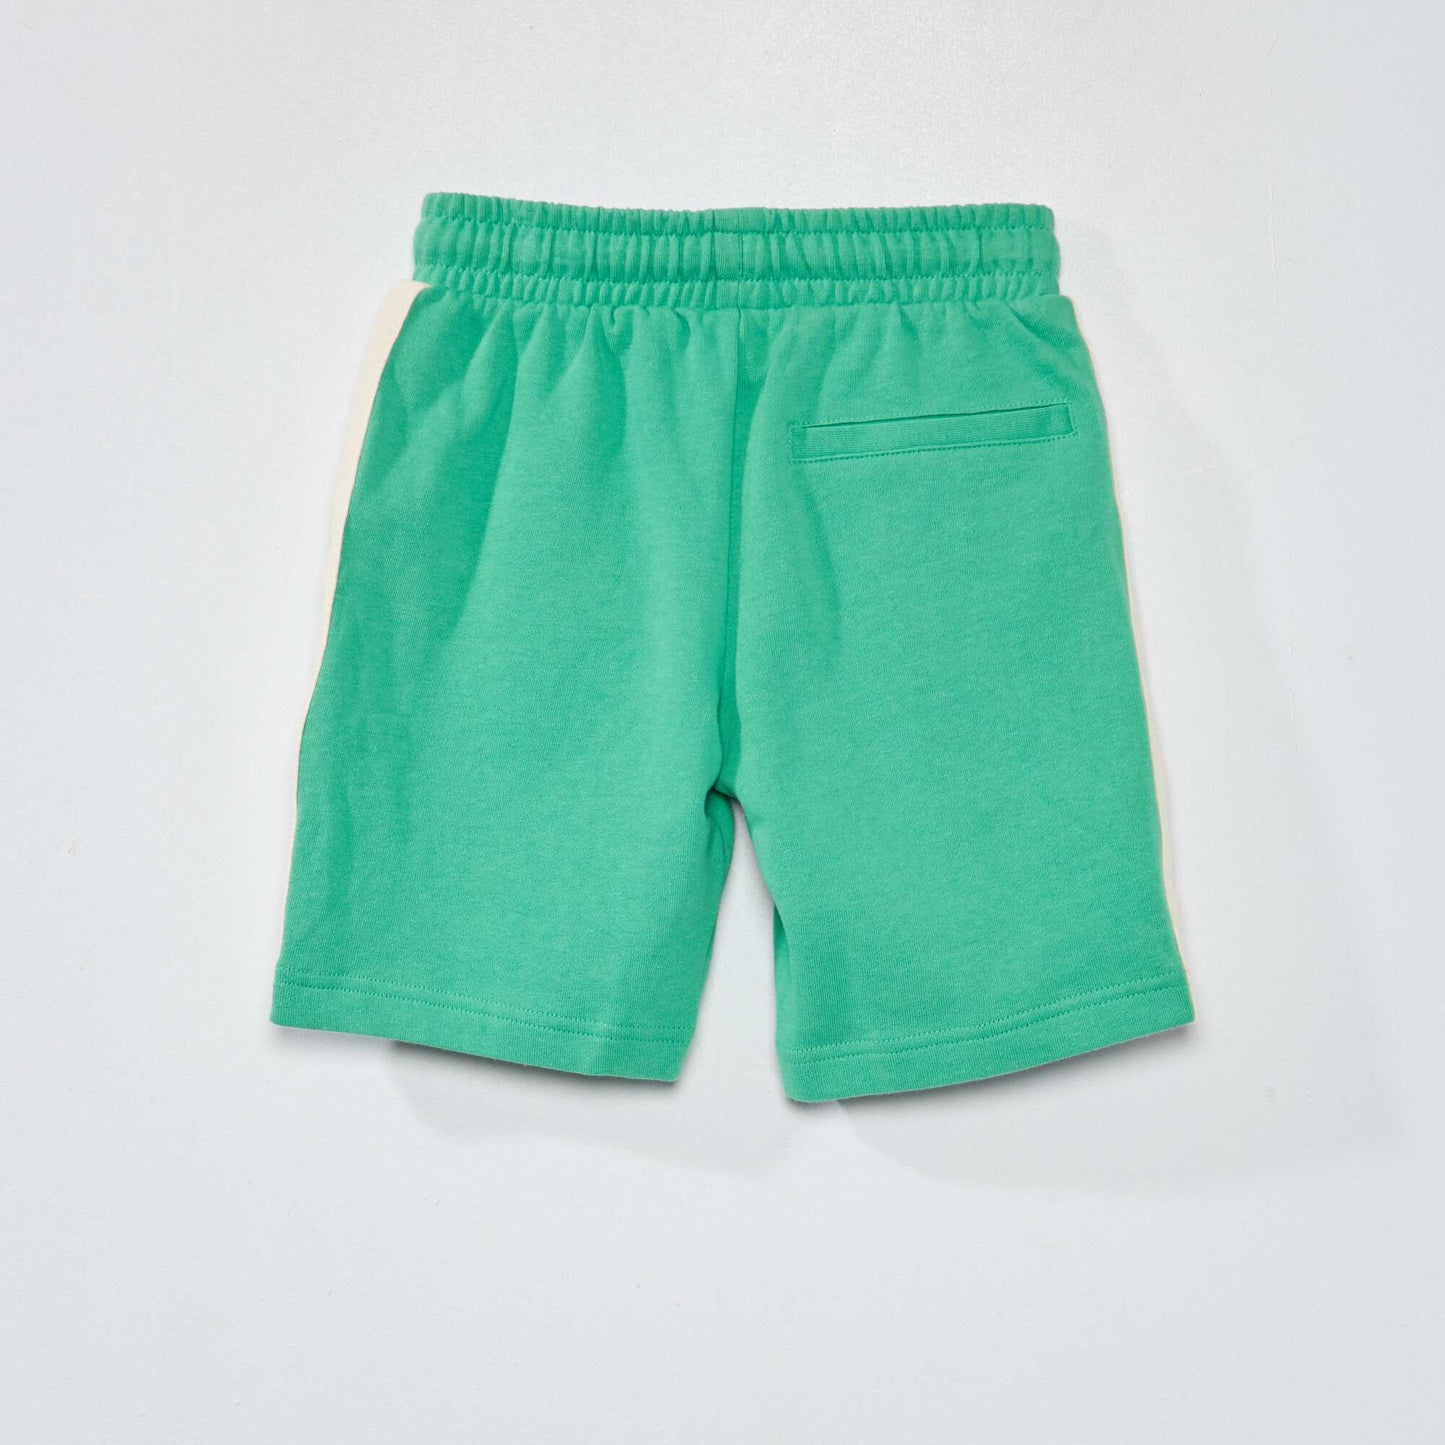 Sports shorts with stripes on the sides GREEN